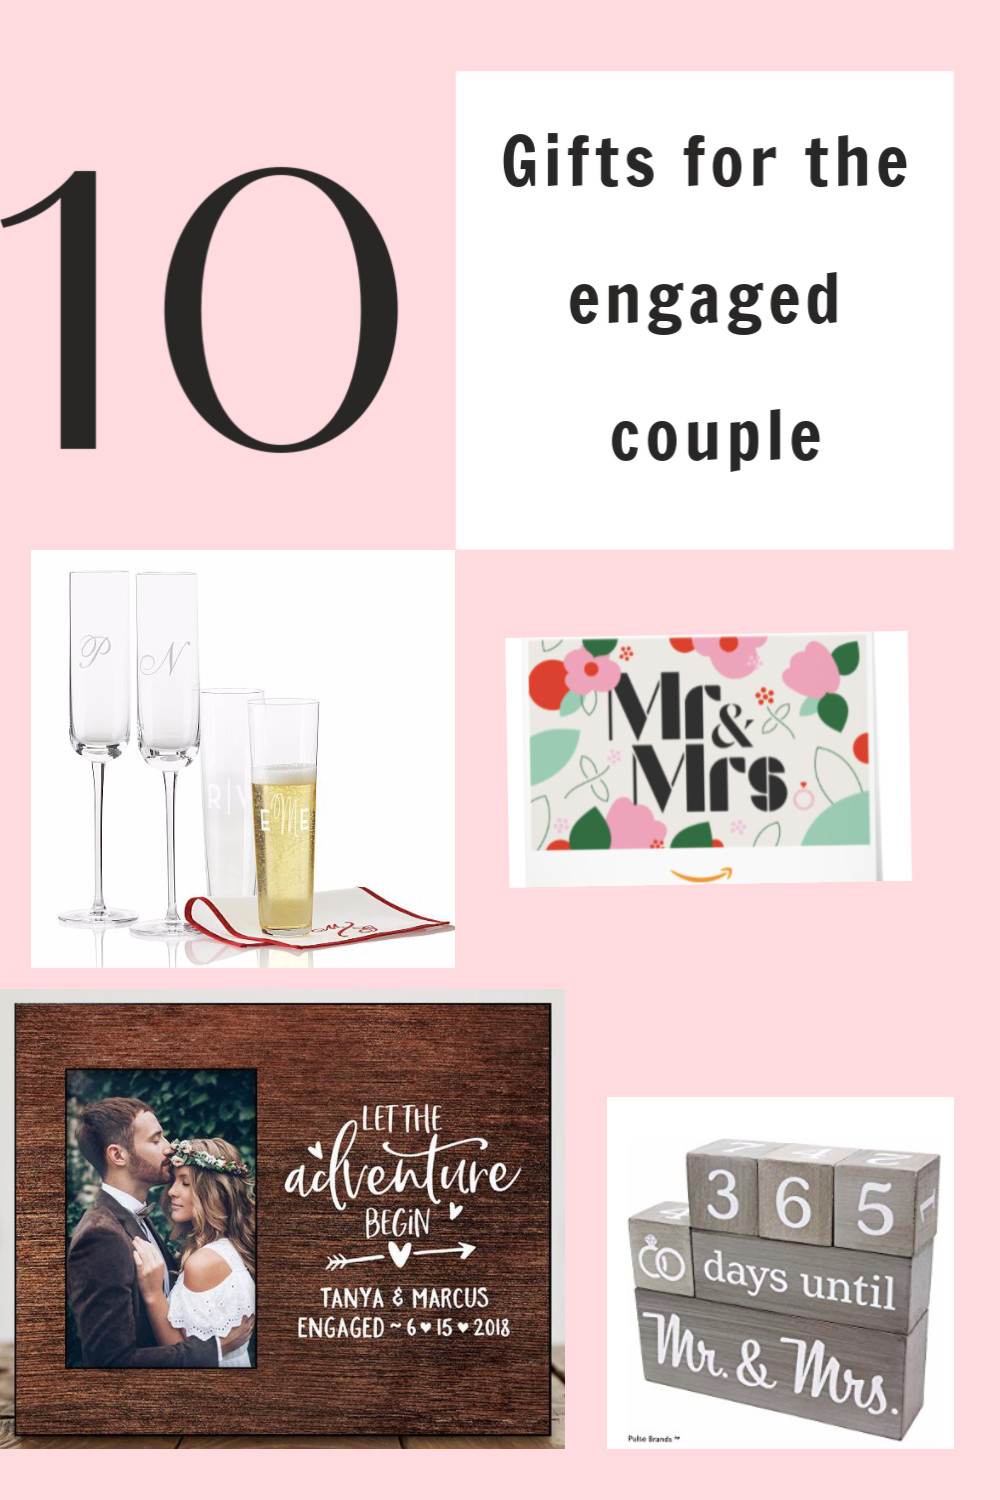 Gift Ideas For Newly Engaged Couples
 10 Cute Gift Ideas for the Engaged Couple